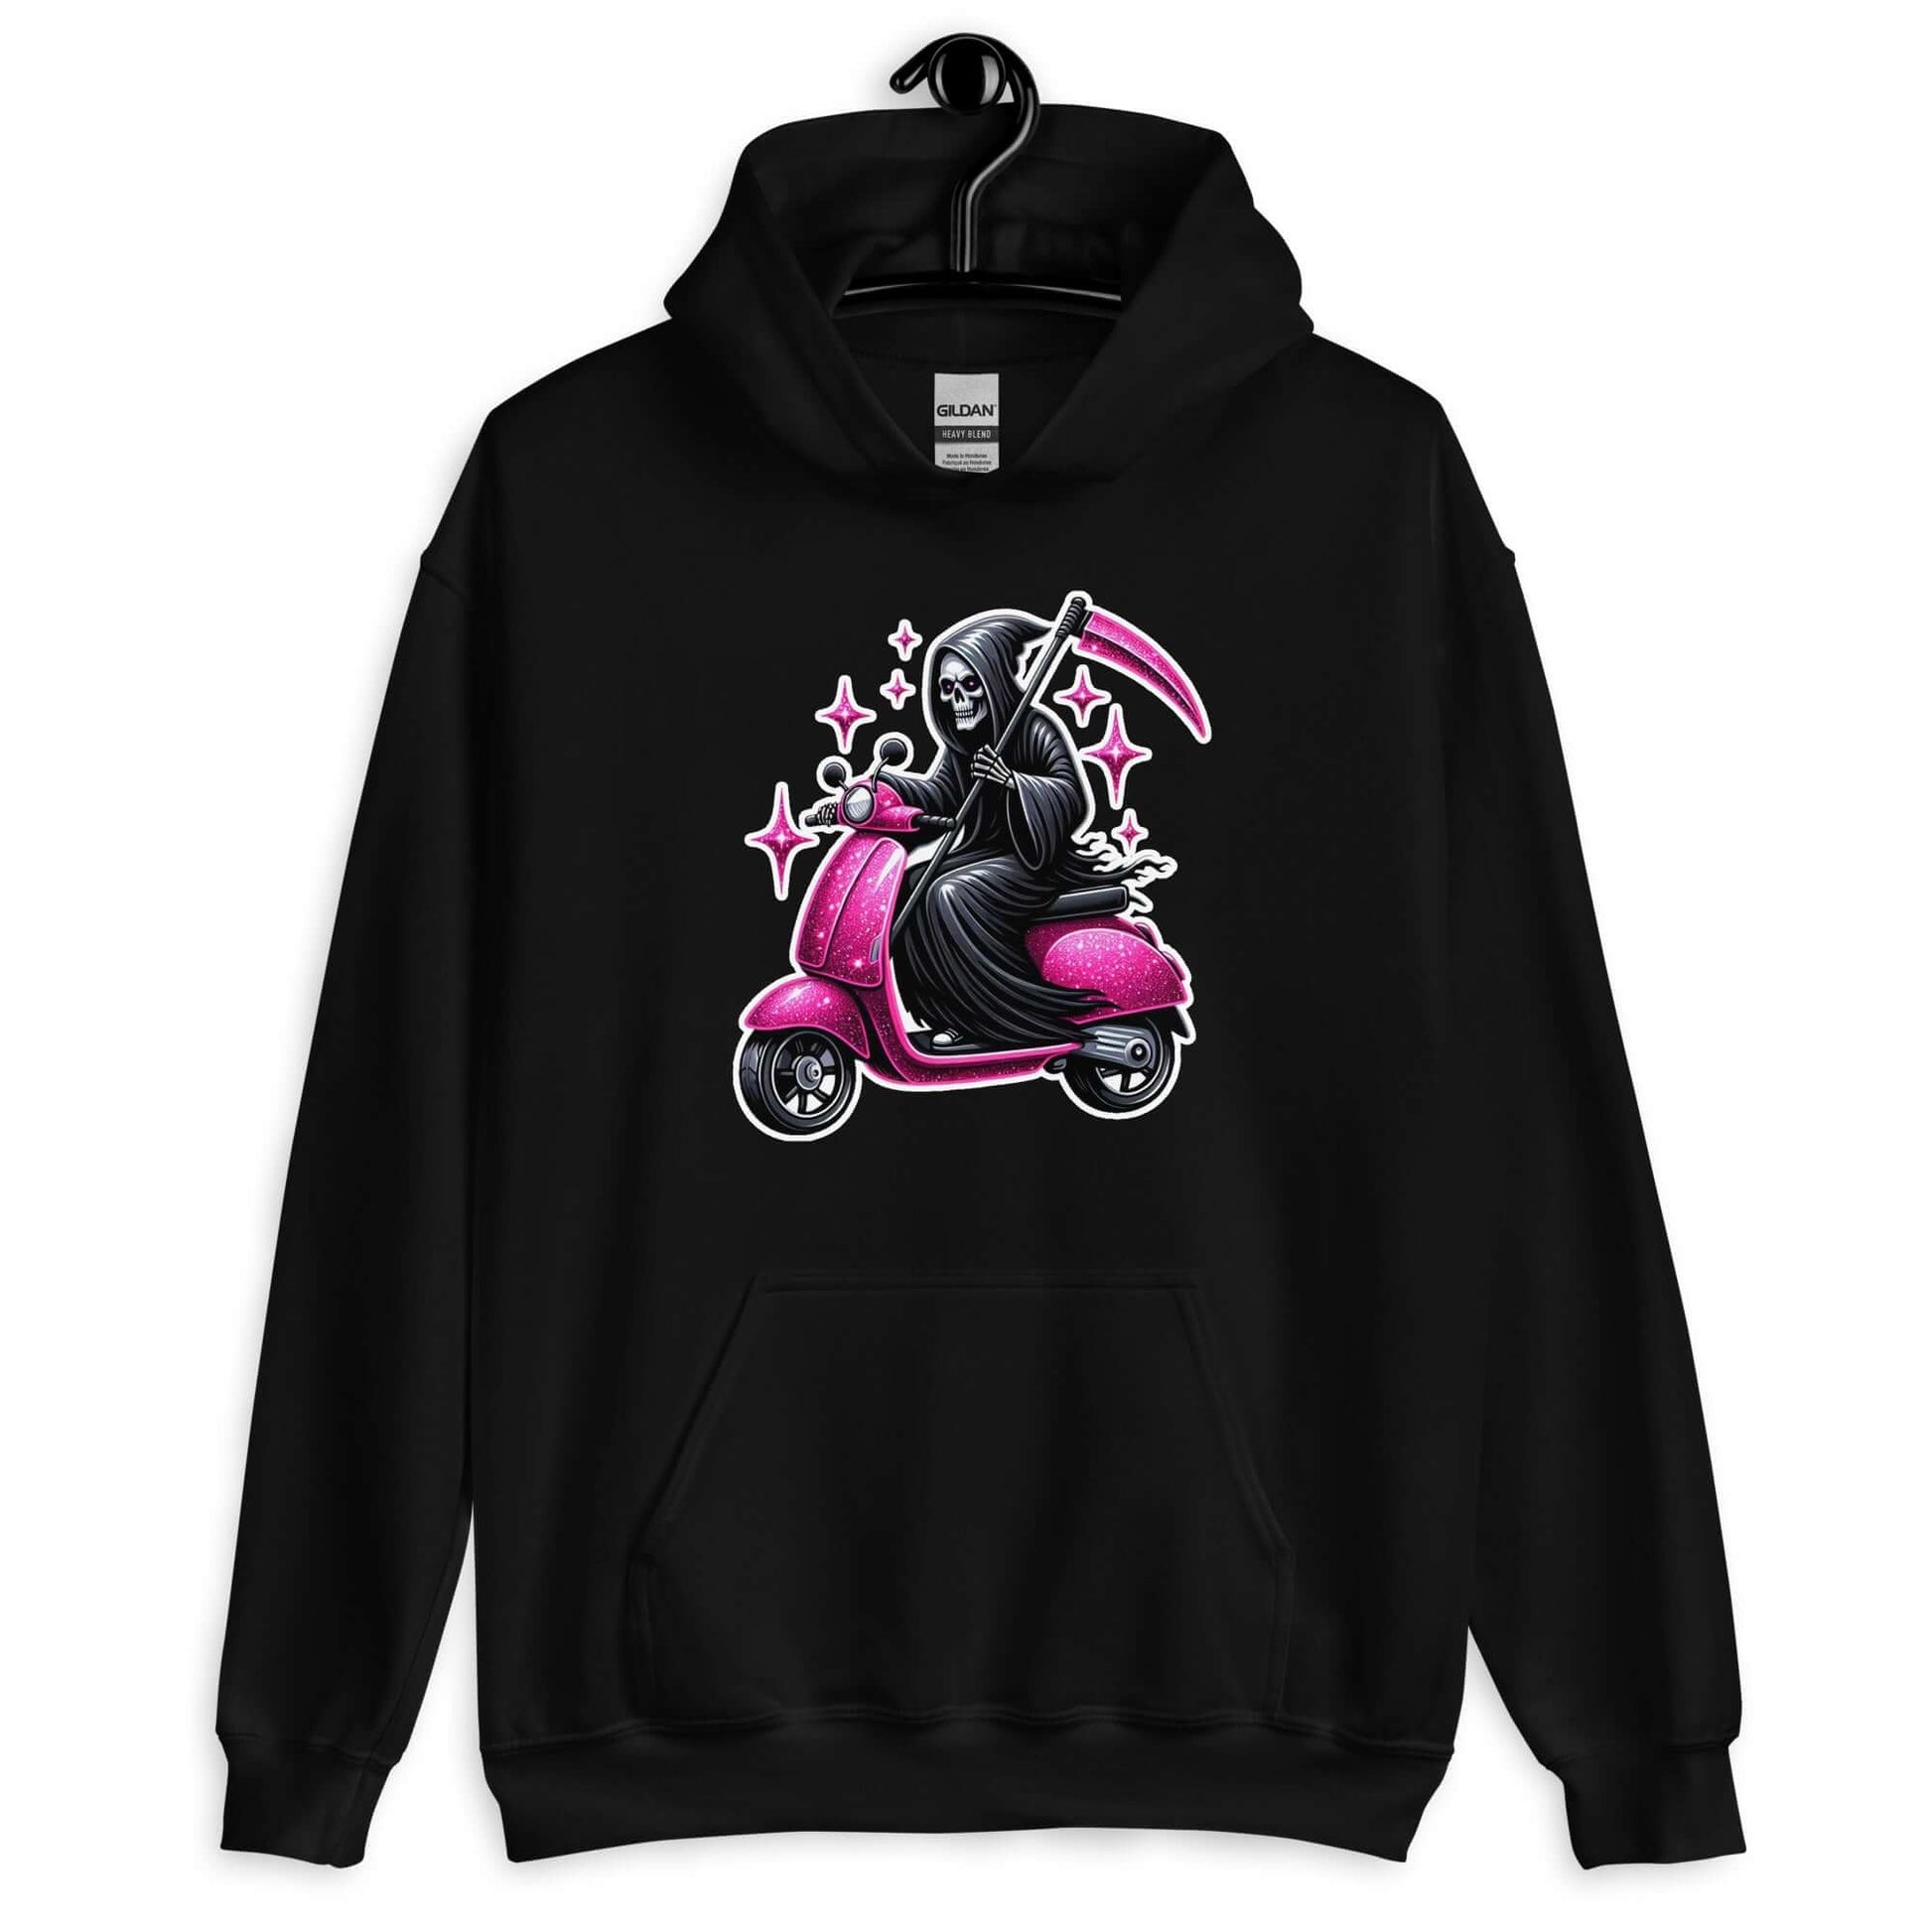 Black hoodie sweatshirt with funny image of the Grim Reaper riding on a glam pink scooter printed on the front.